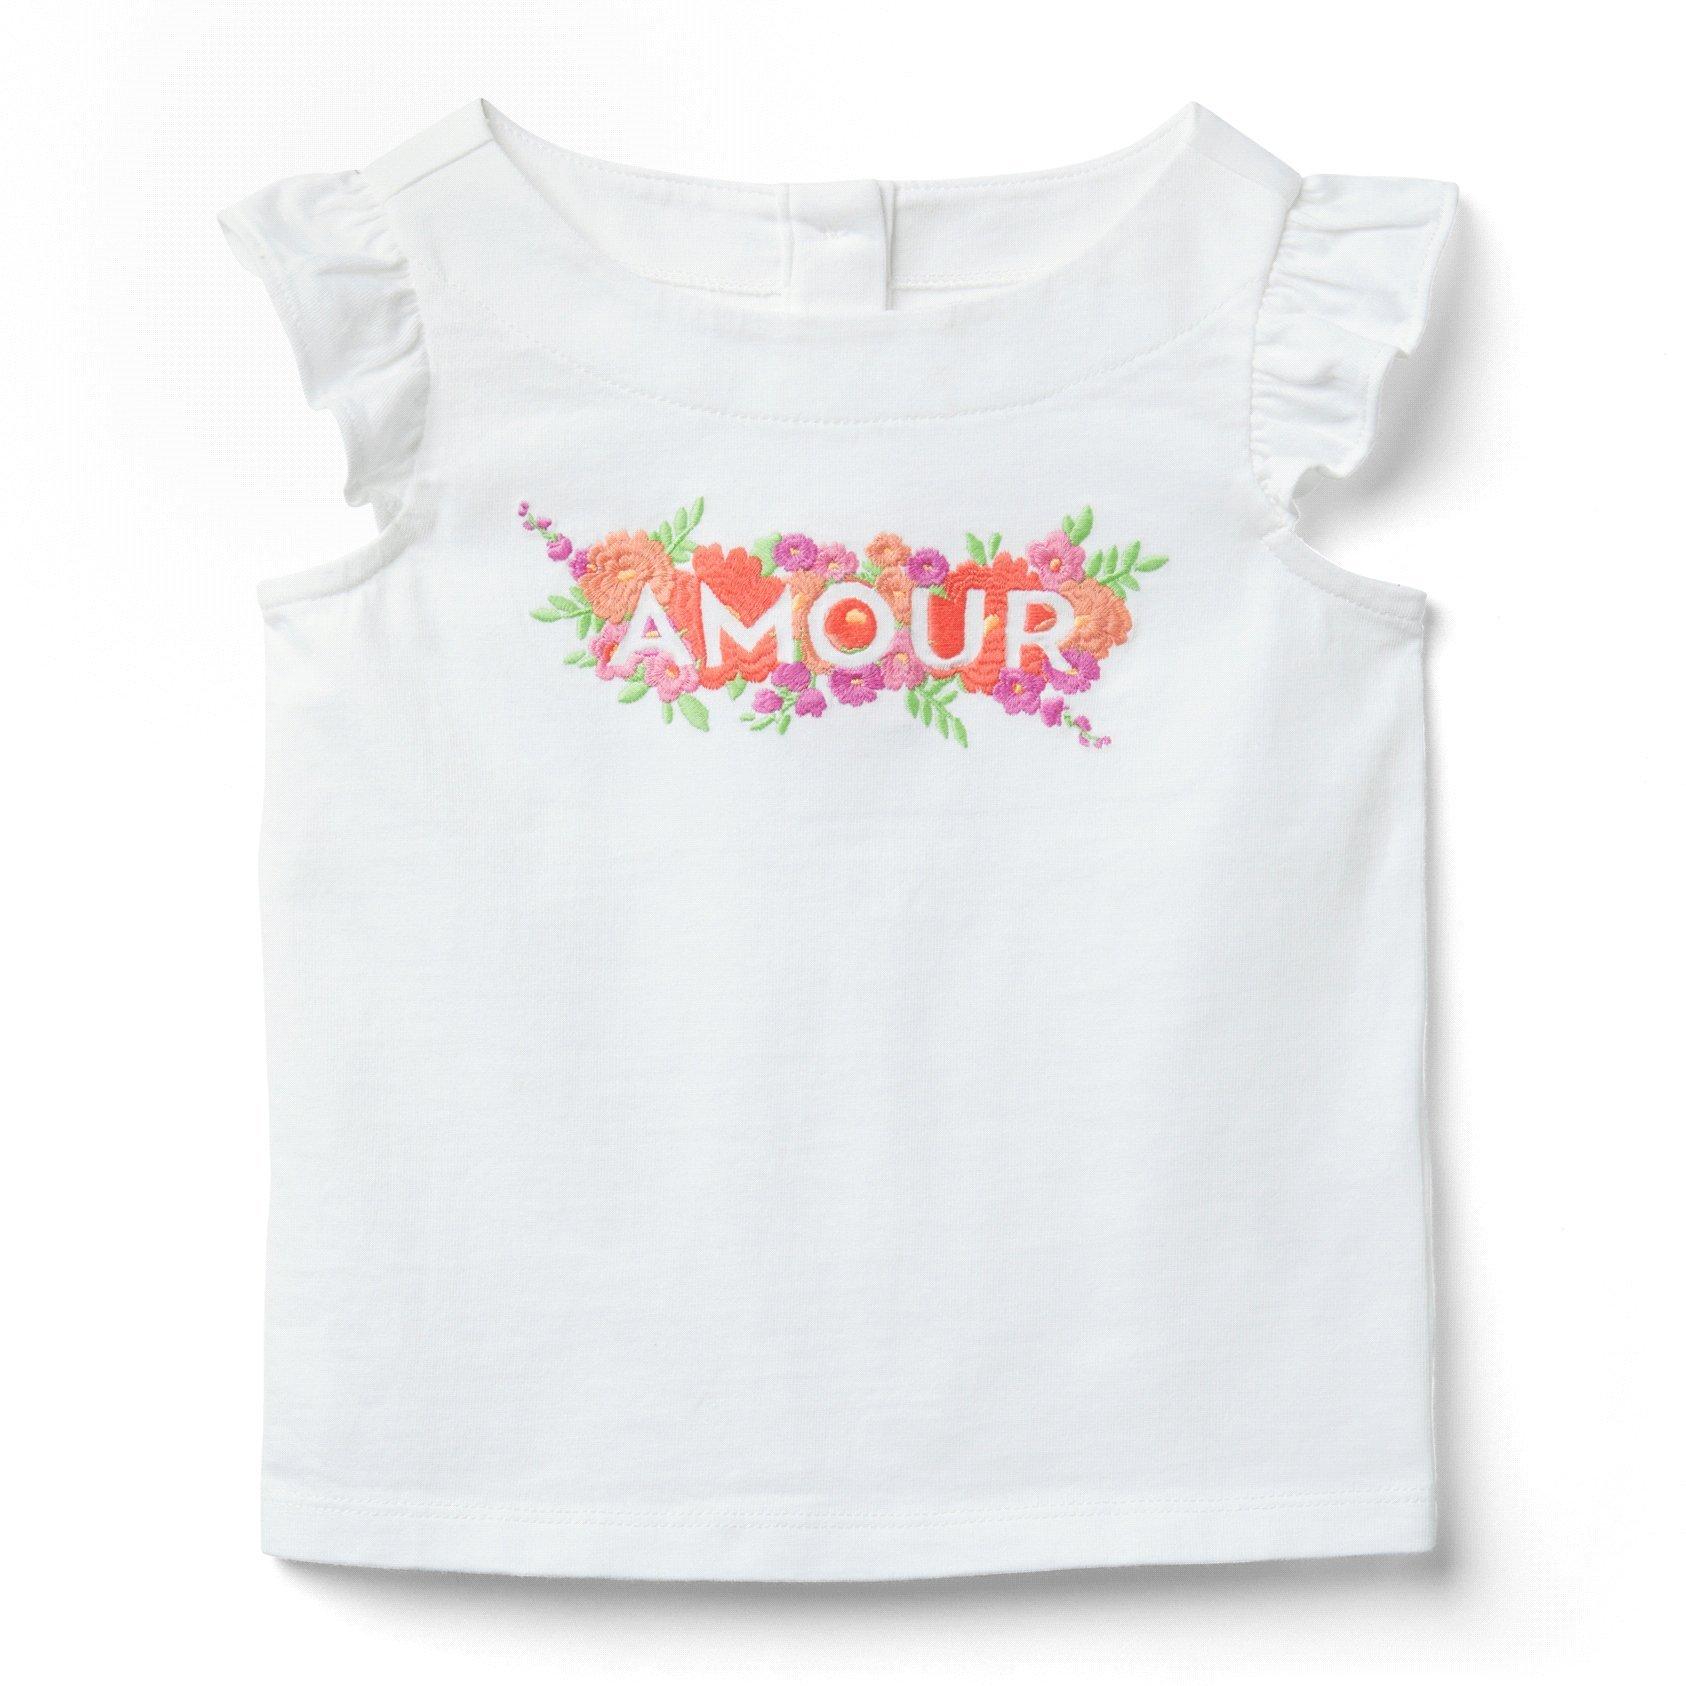 Amour Tee image number 0